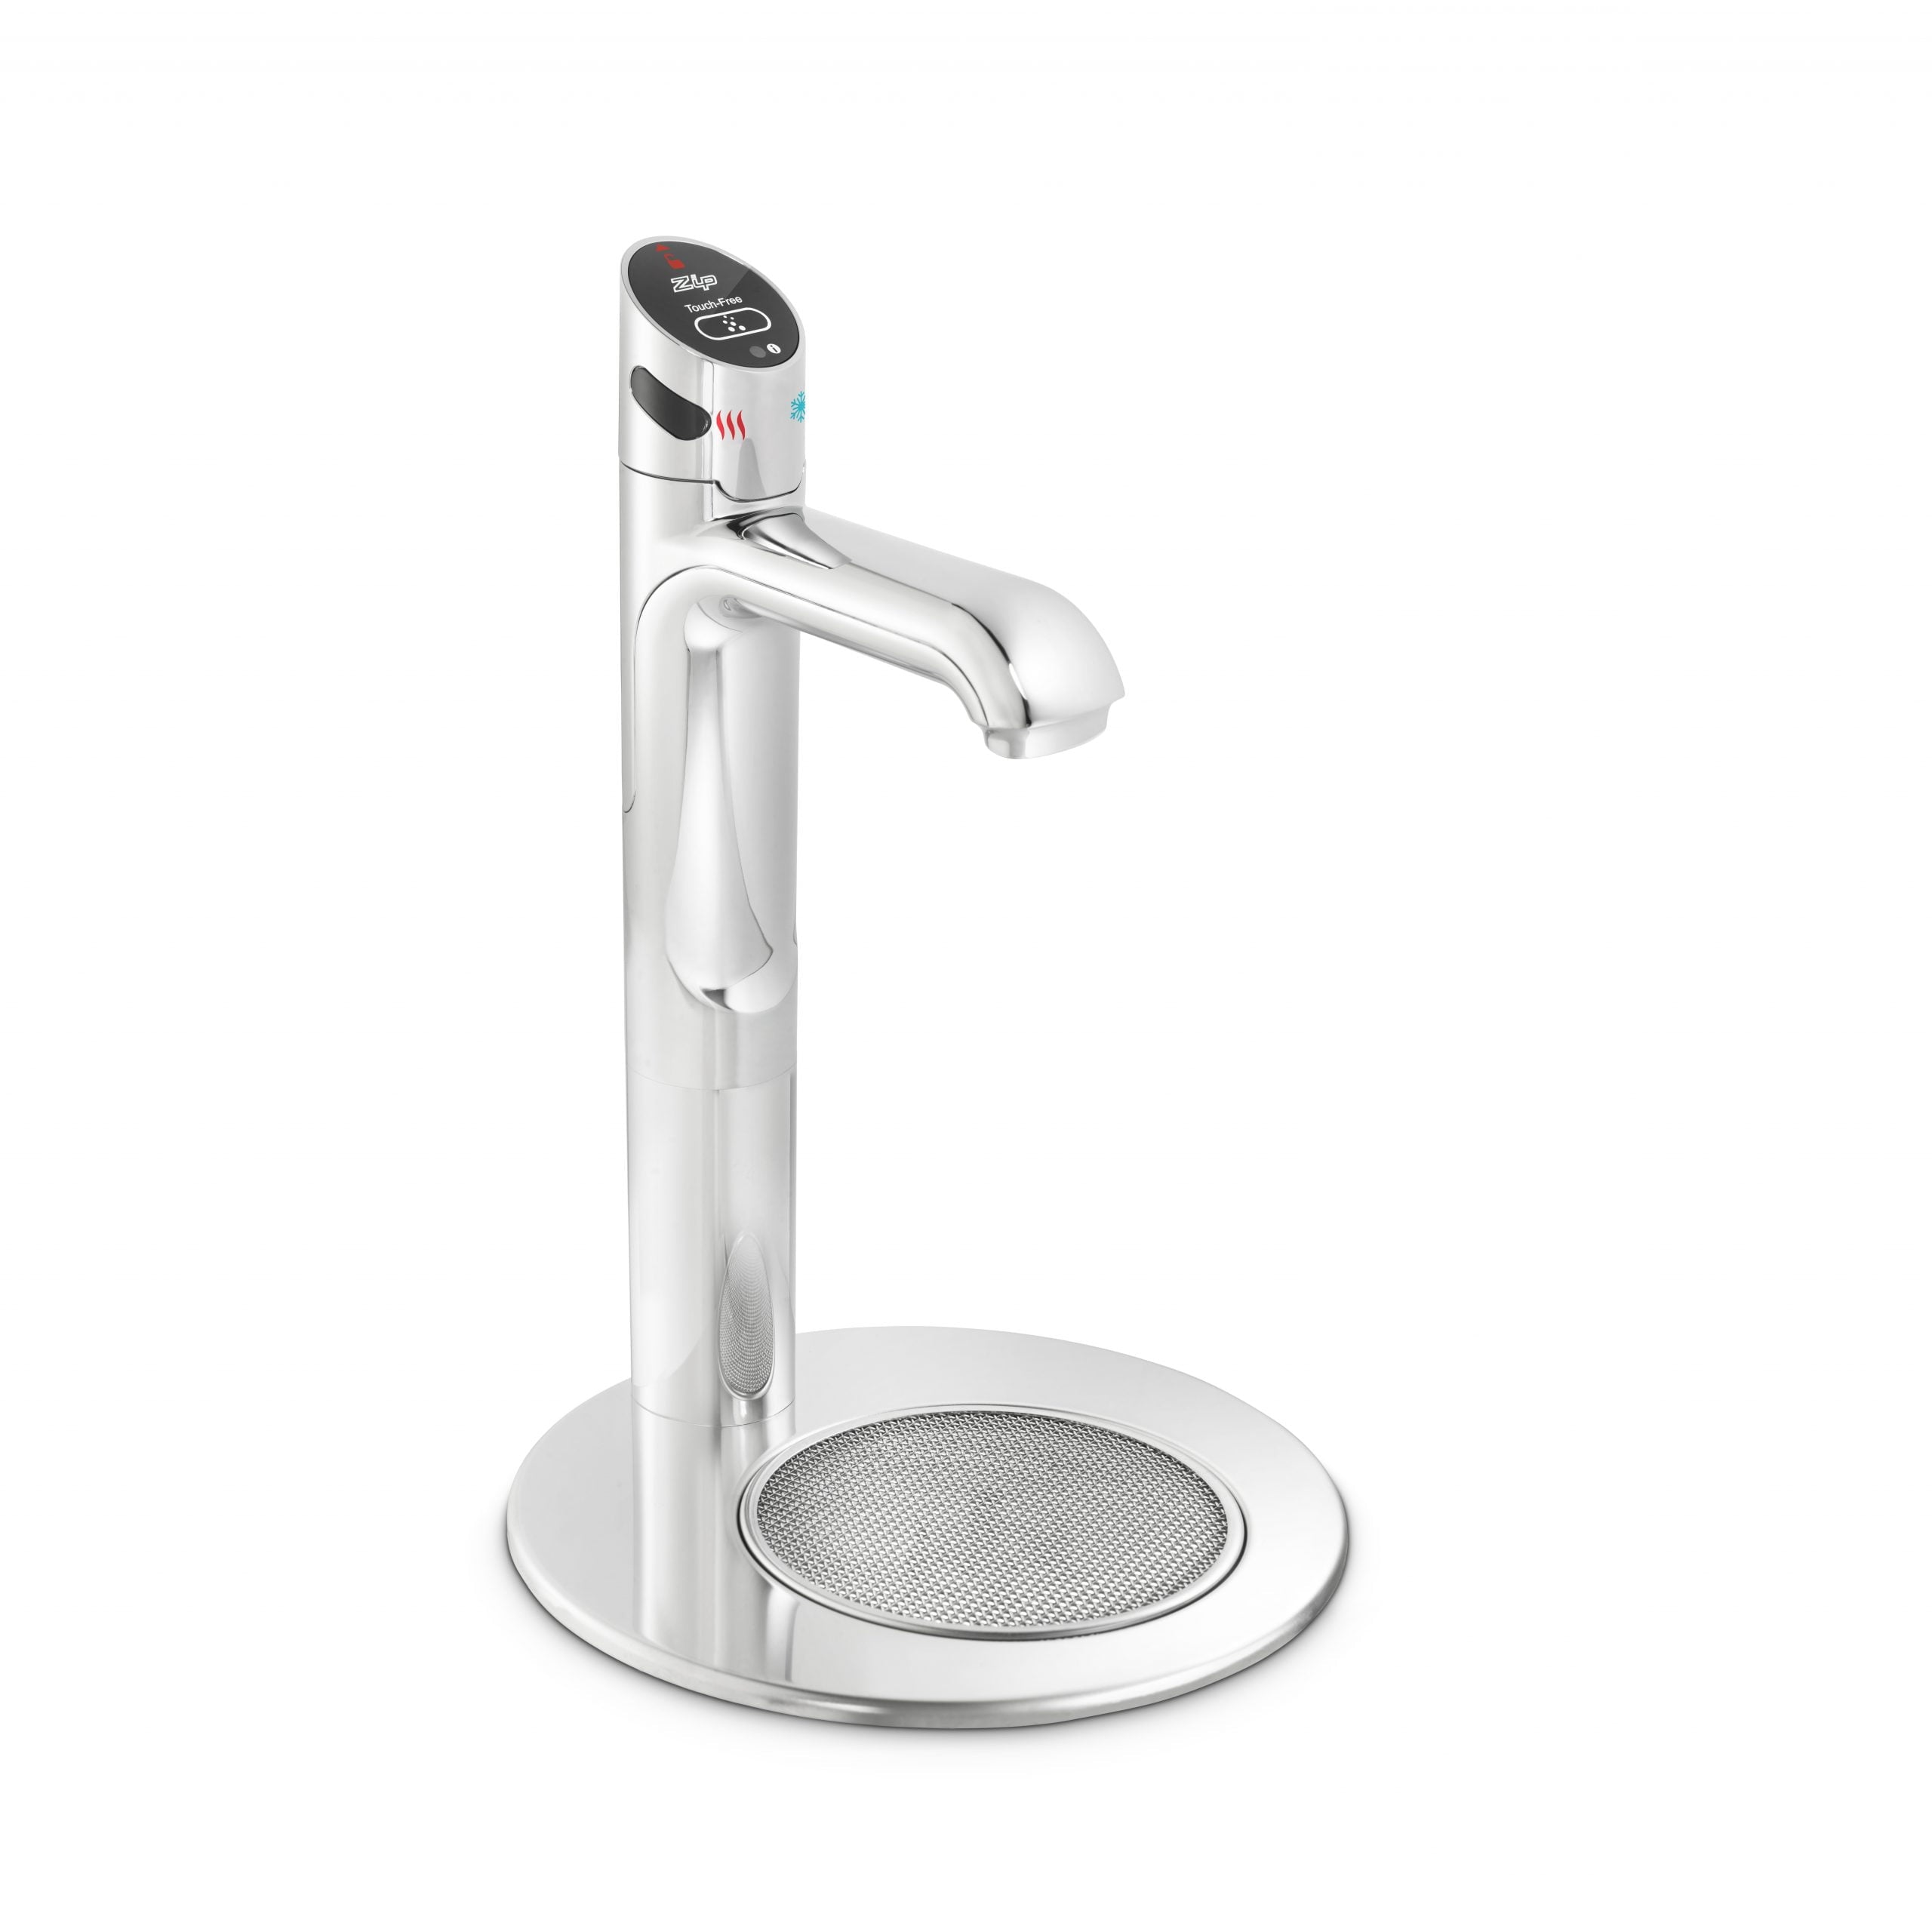 chrome water faucet